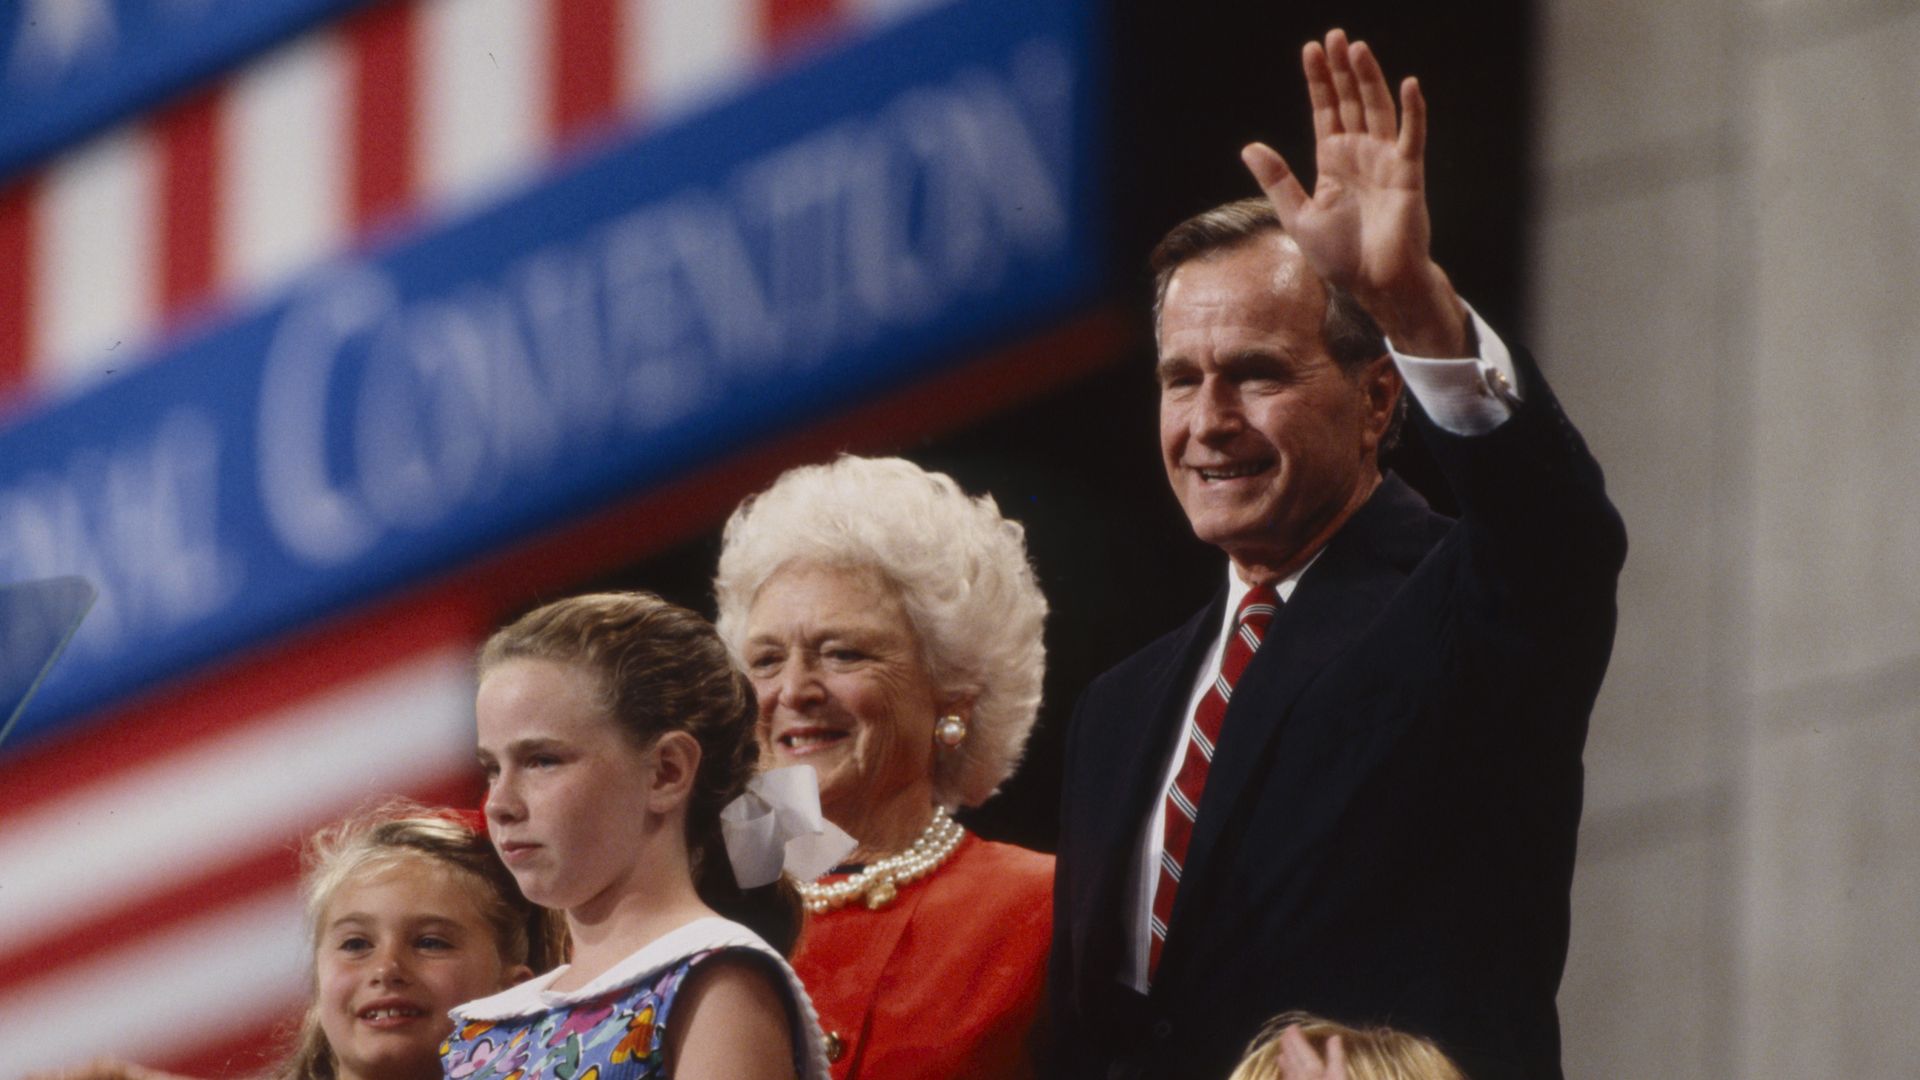 George H.W. Bush, flanked by Barbara Bush and young family members, waves to the crowd at the 1992 GOP convention in Houston